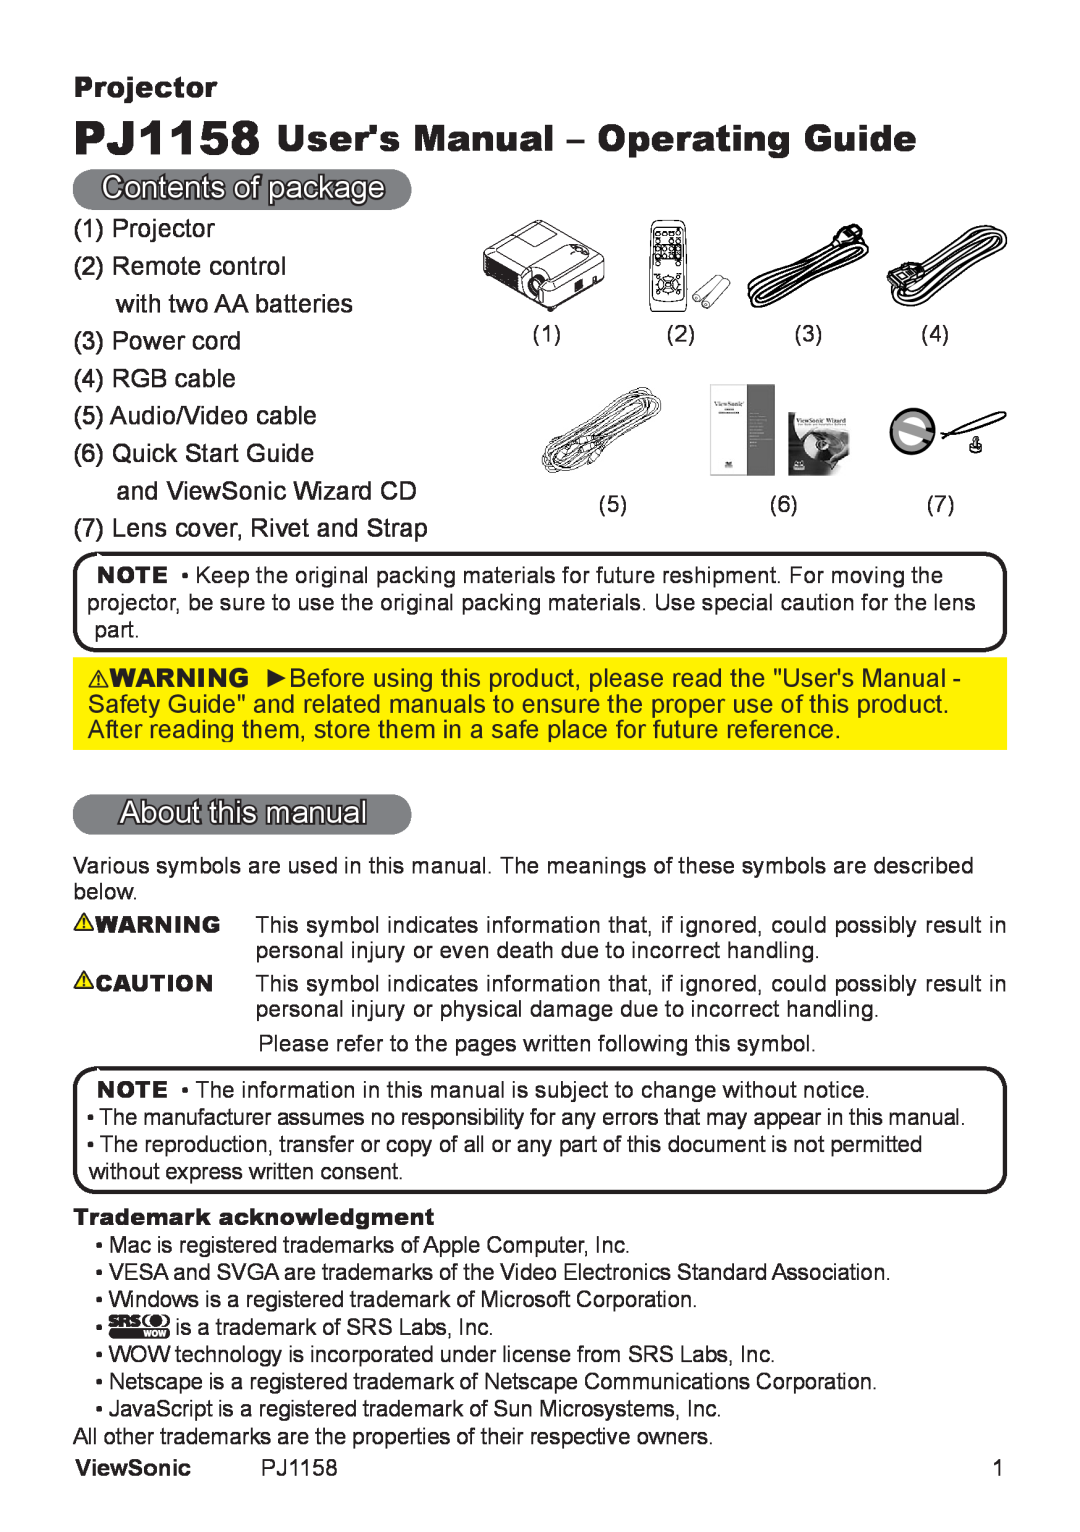 ViewSonic PJ1158 Users Manual – Operating Guide, Contents of package, About this manual, Projector 